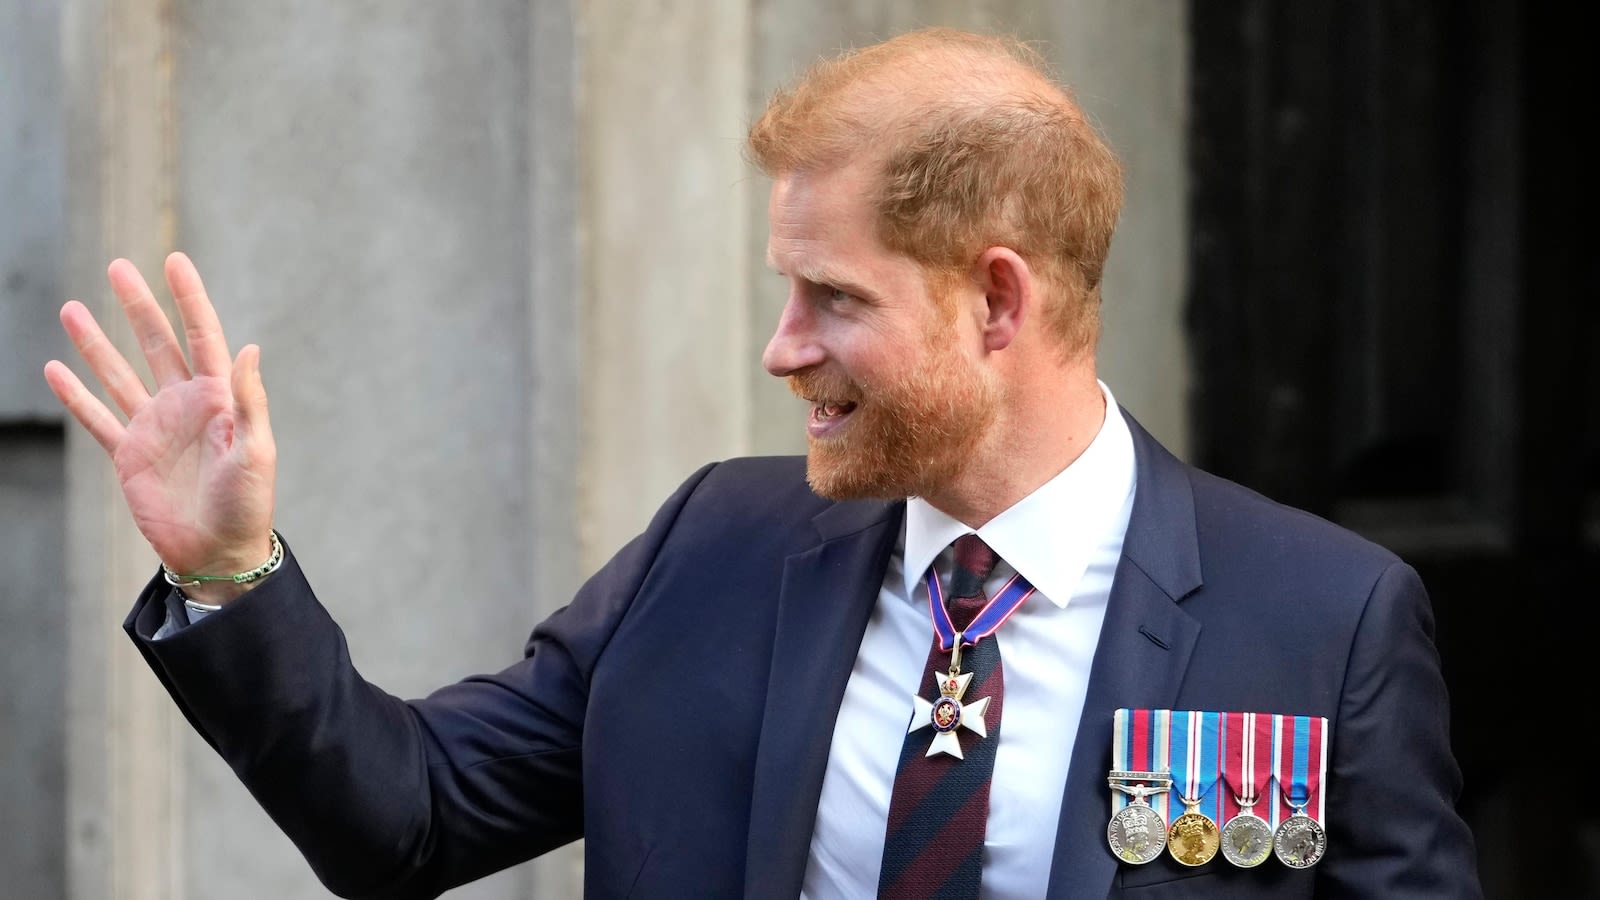 Prince Harry, Meghan arrive in Nigeria to champion the Invictus Games and meet with wounded soldiers